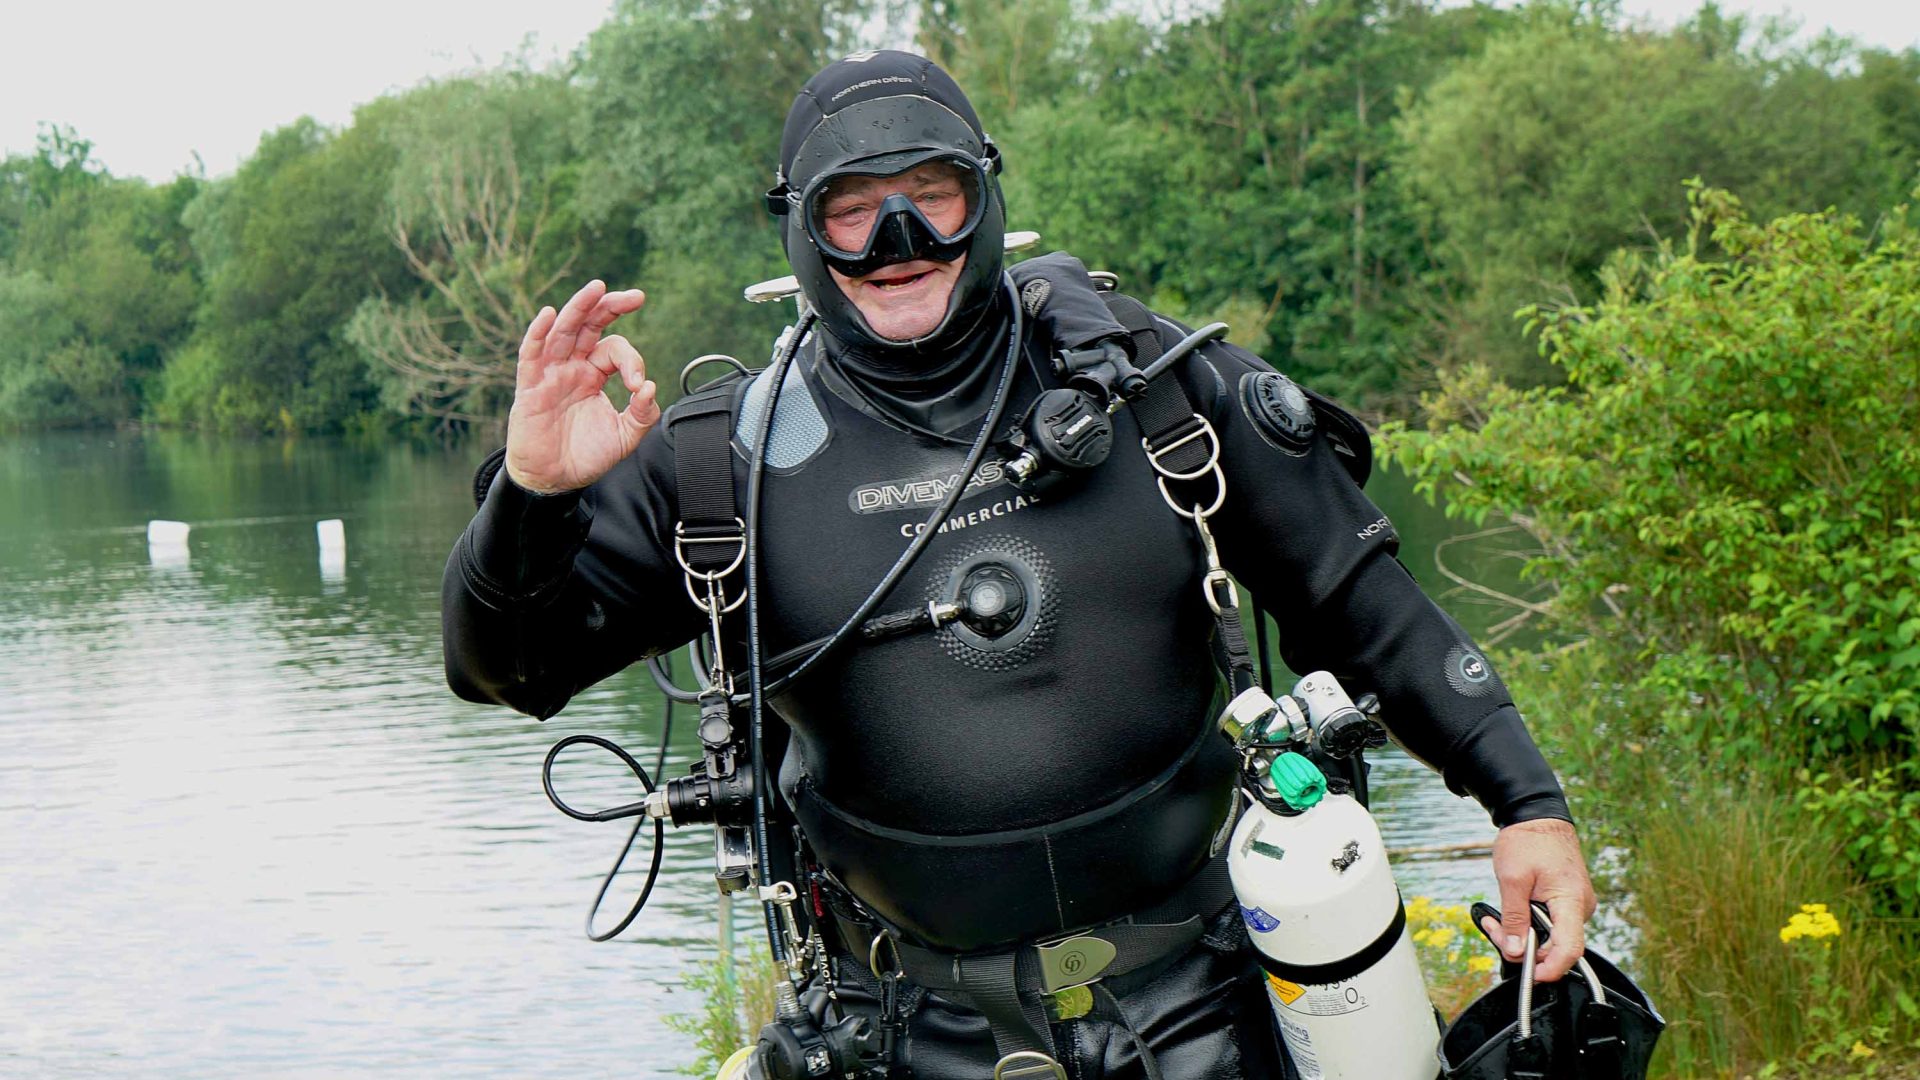 Alastair in scuba diving gear by a river.